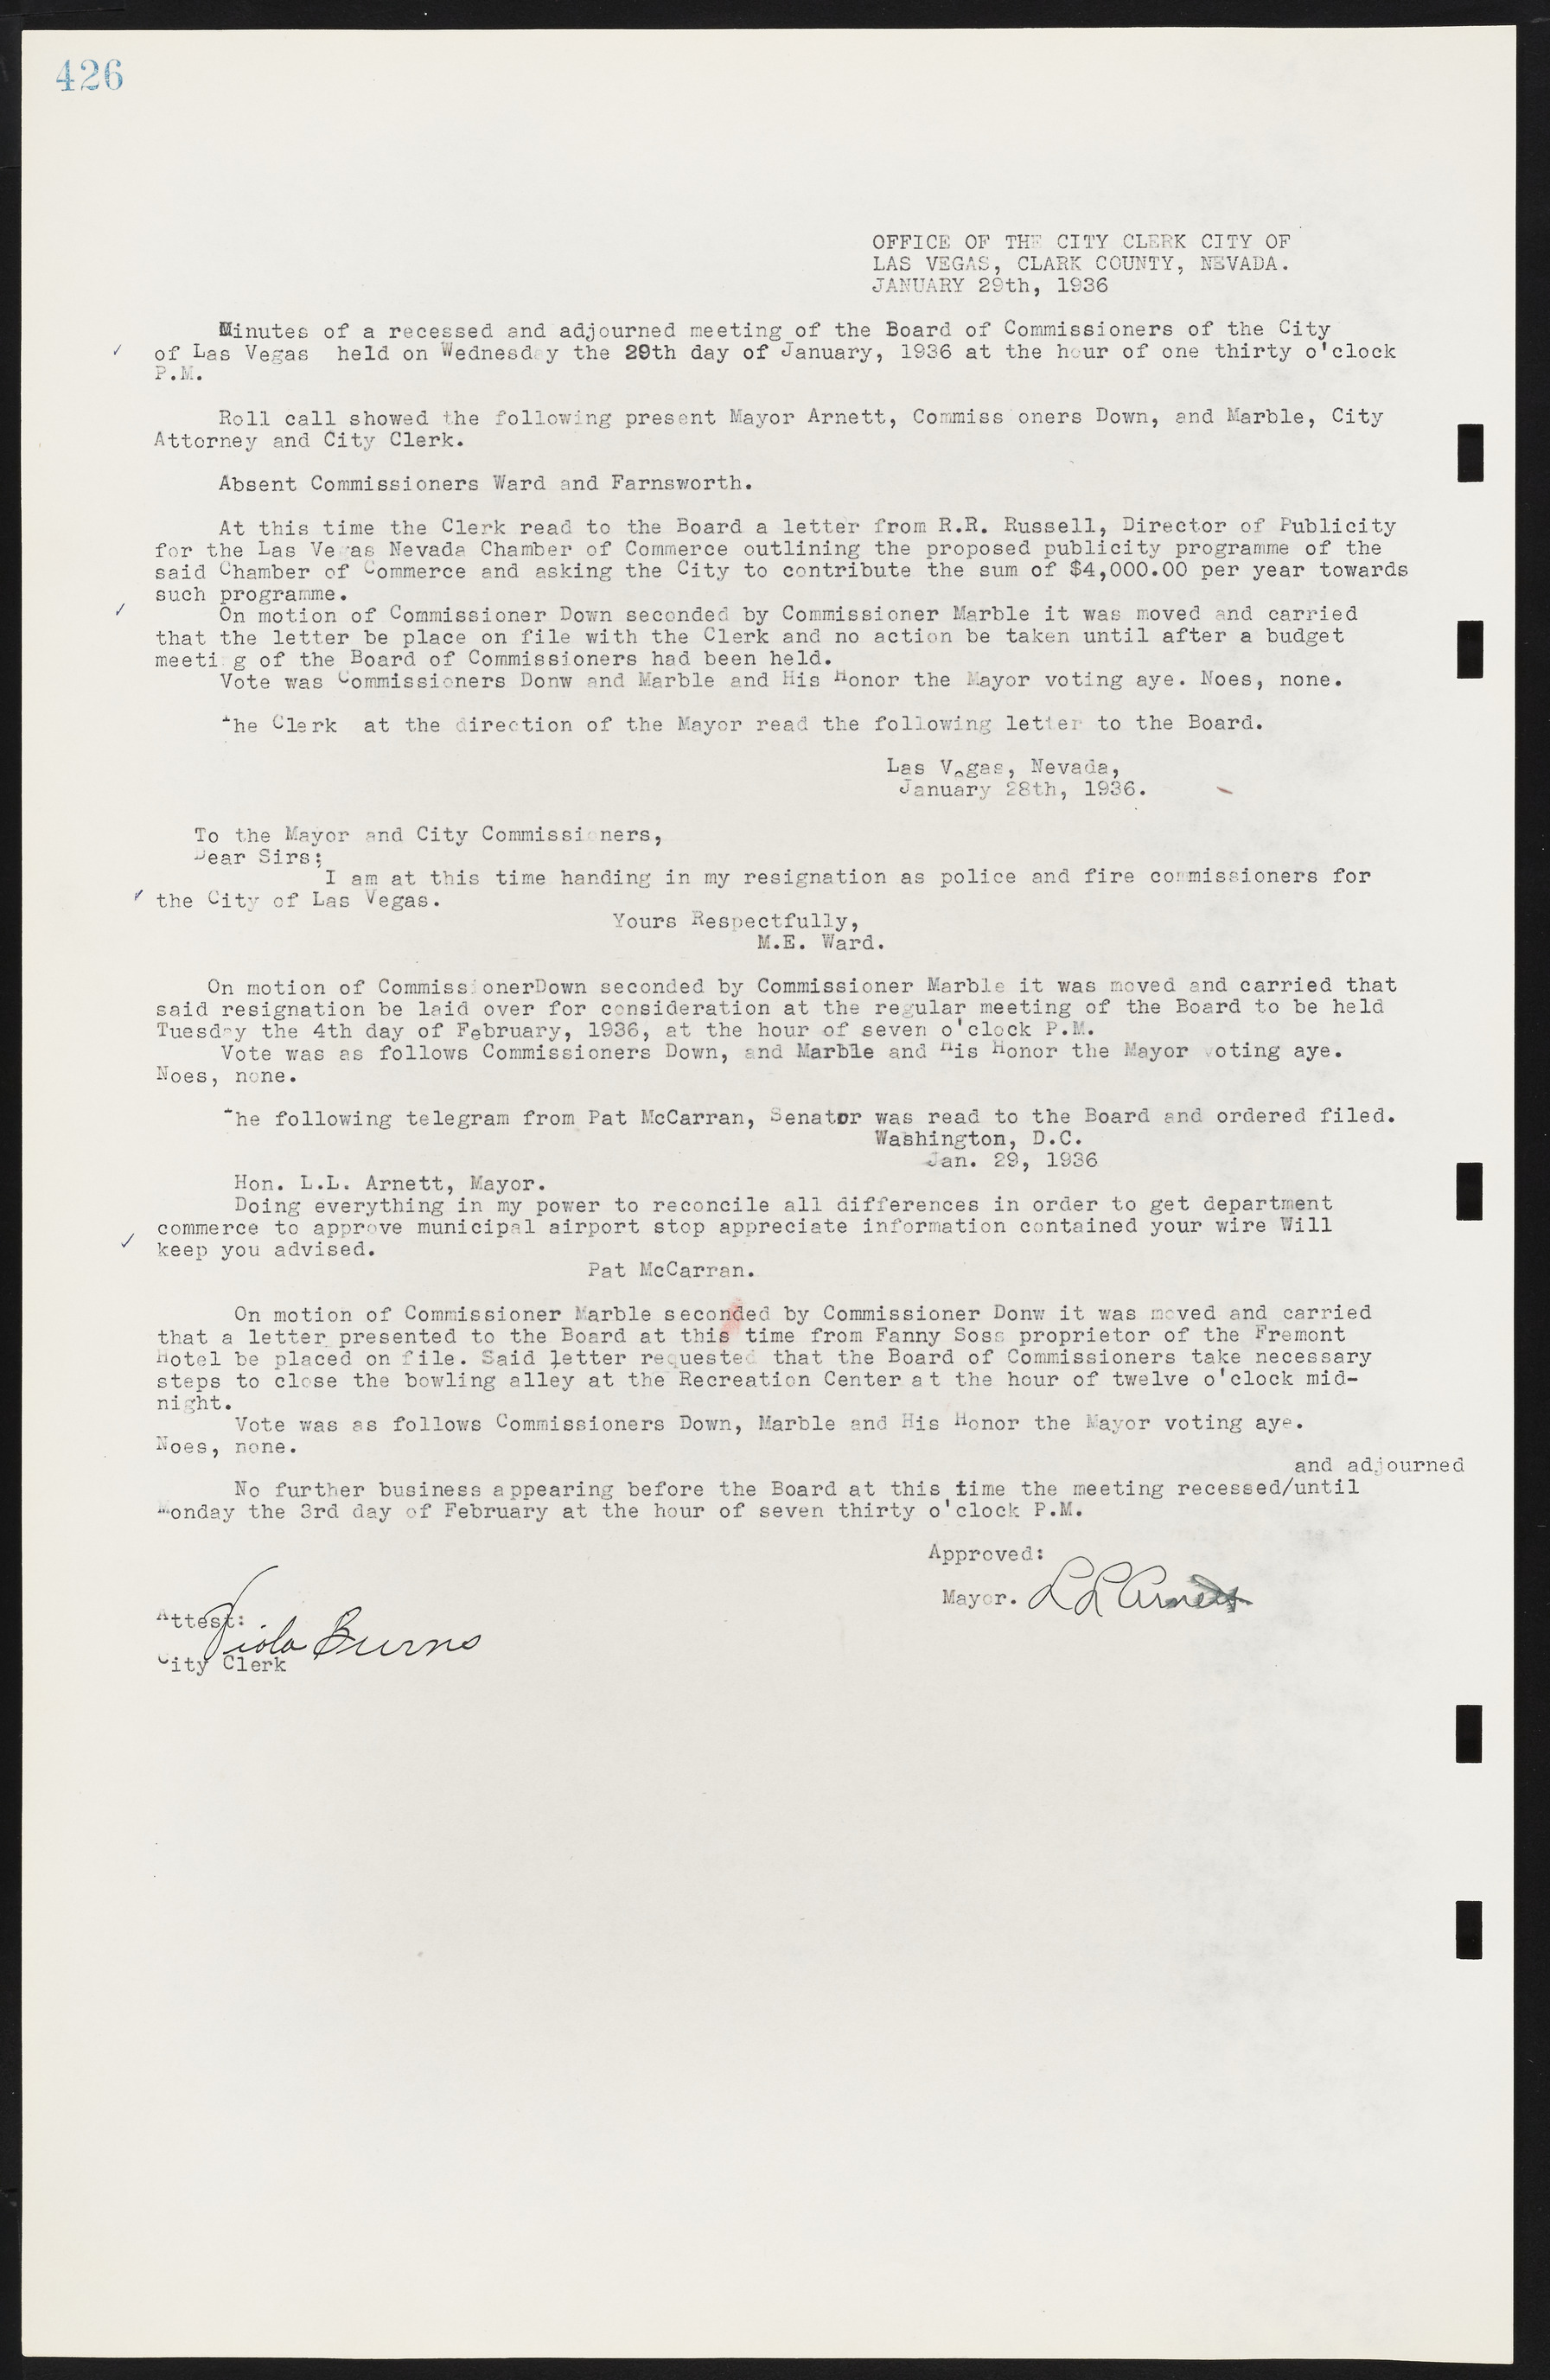 Las Vegas City Commission Minutes, May 14, 1929 to February 11, 1937, lvc000003-433